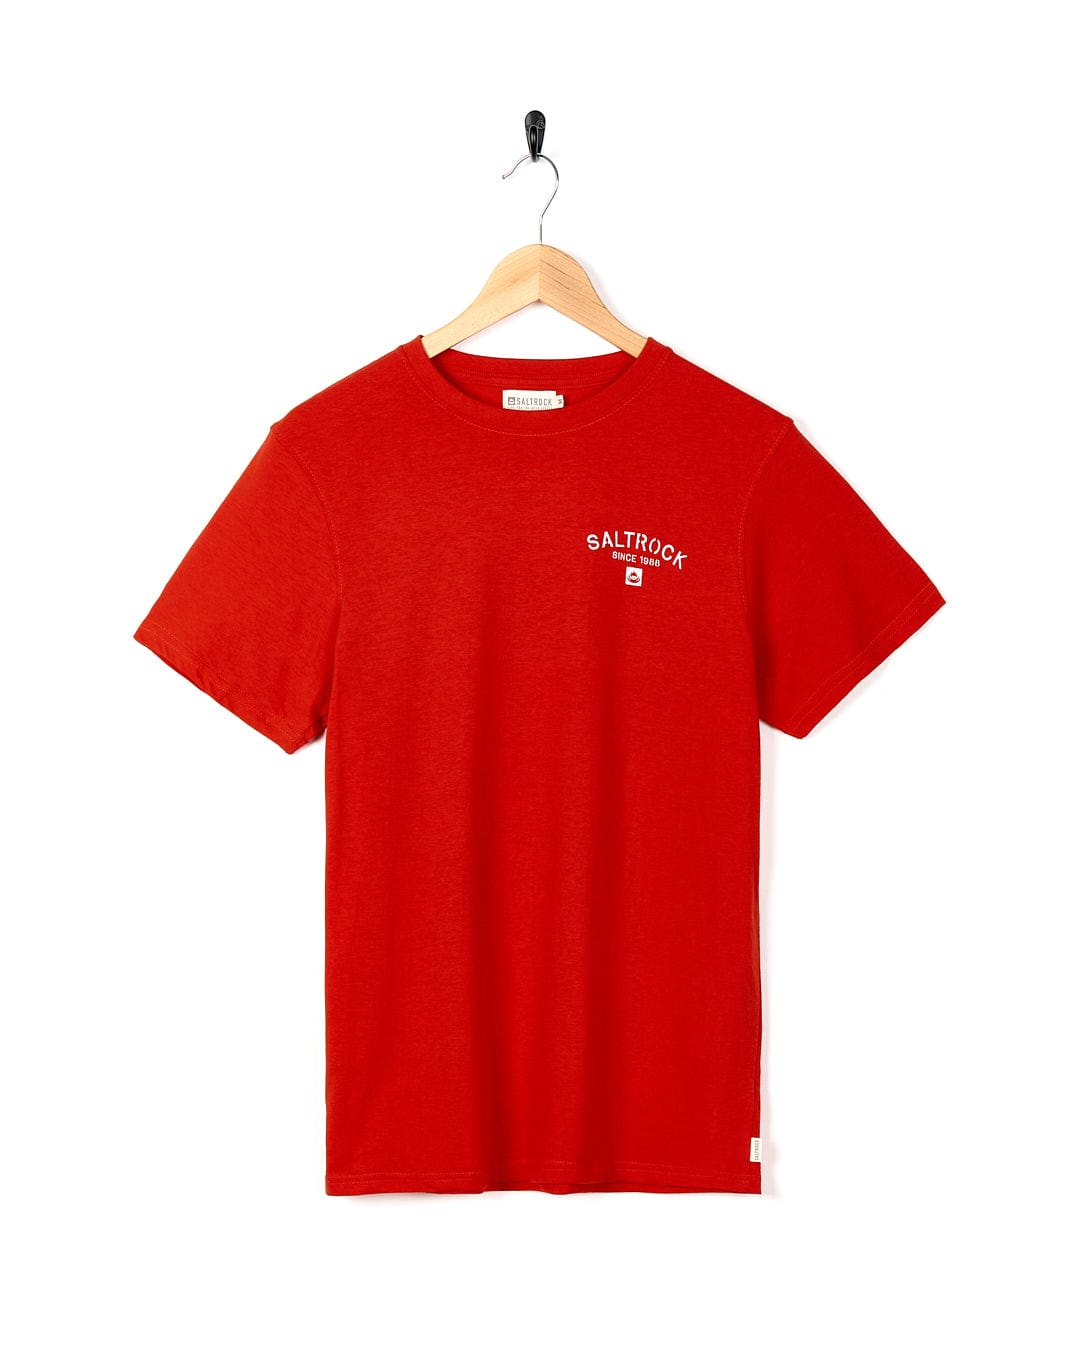 A Saltrock Stencil - Mens Location T-Shirt - Woolacombe - Red with a white logo on it.